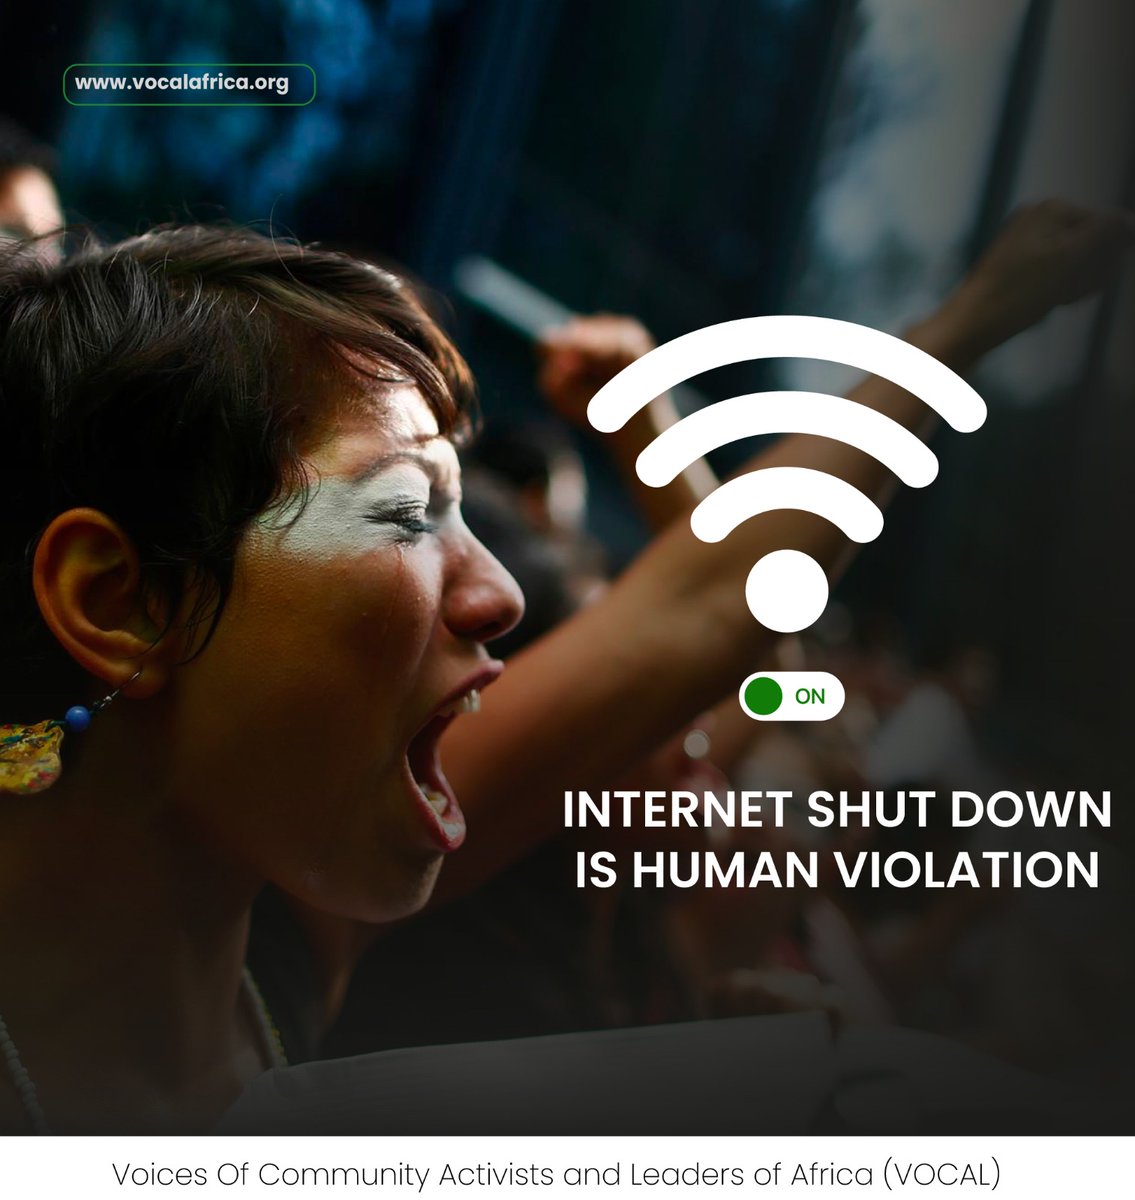 The shutdown of the internet is unacceptable and a violation of digital rights. Access to the internet is essential for communication, information sharing, and civic engagement. Let's stand together to ensure uninterrupted access to the internet for all. #DigitalRights…